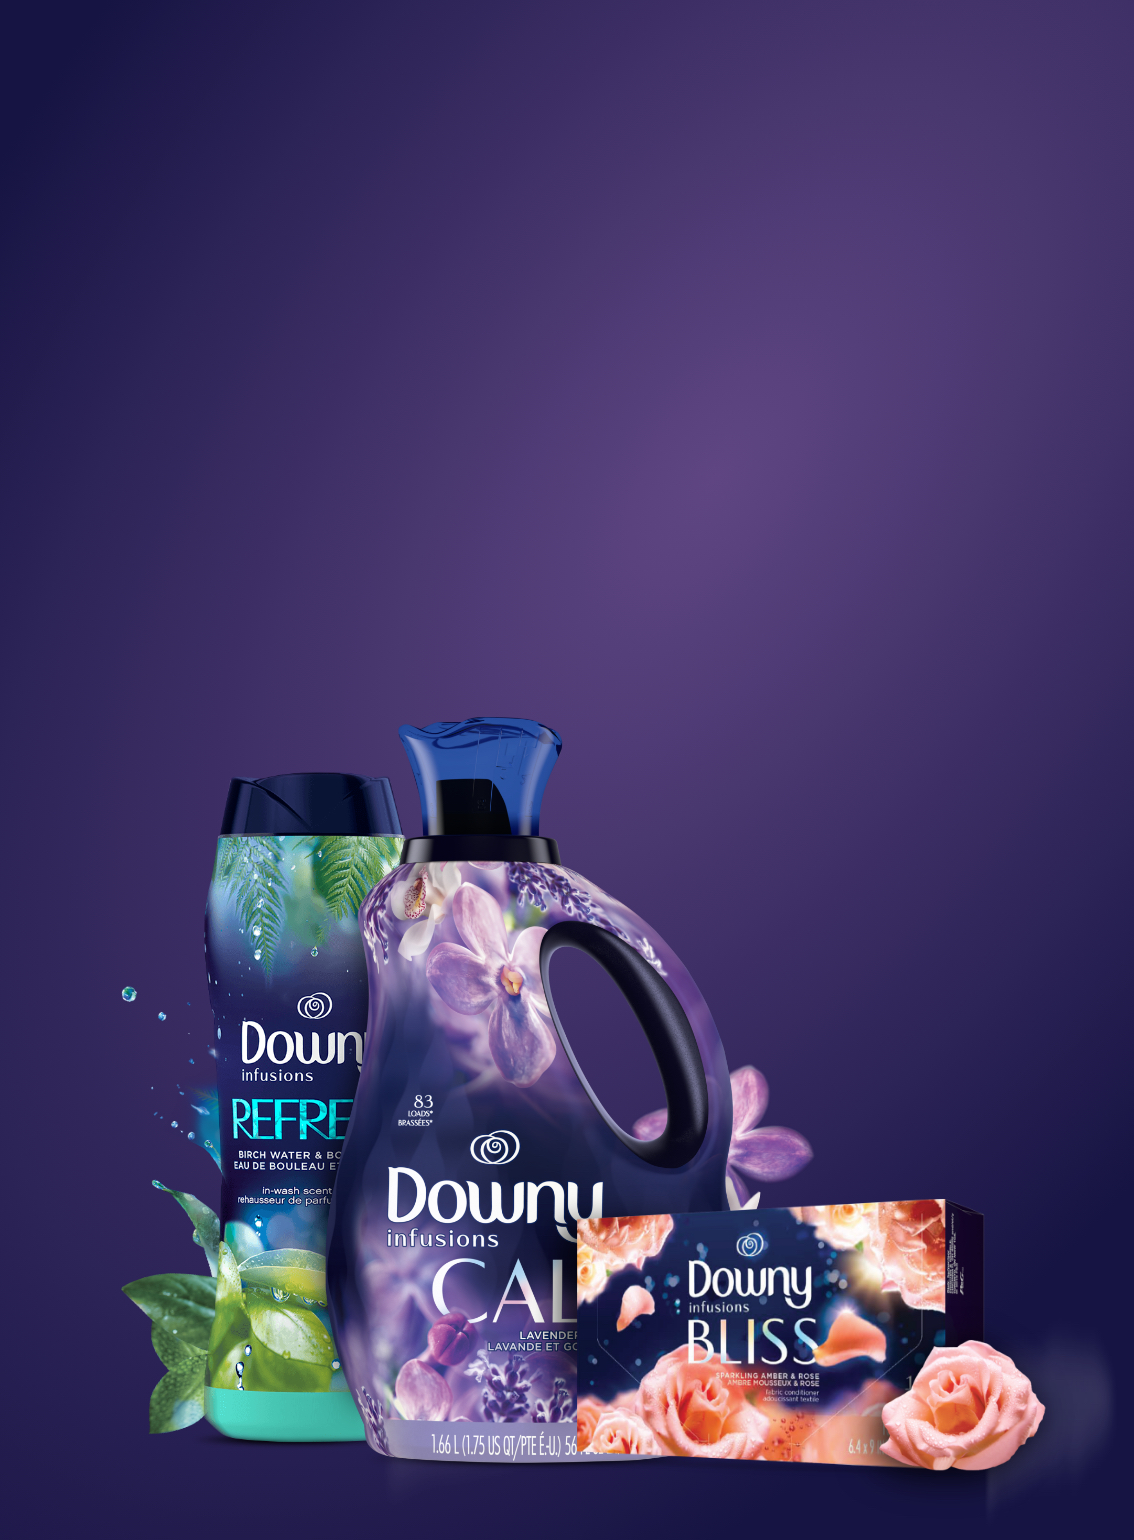 Downy infusions, for clothes that smell as comforting as they feel. View all products.